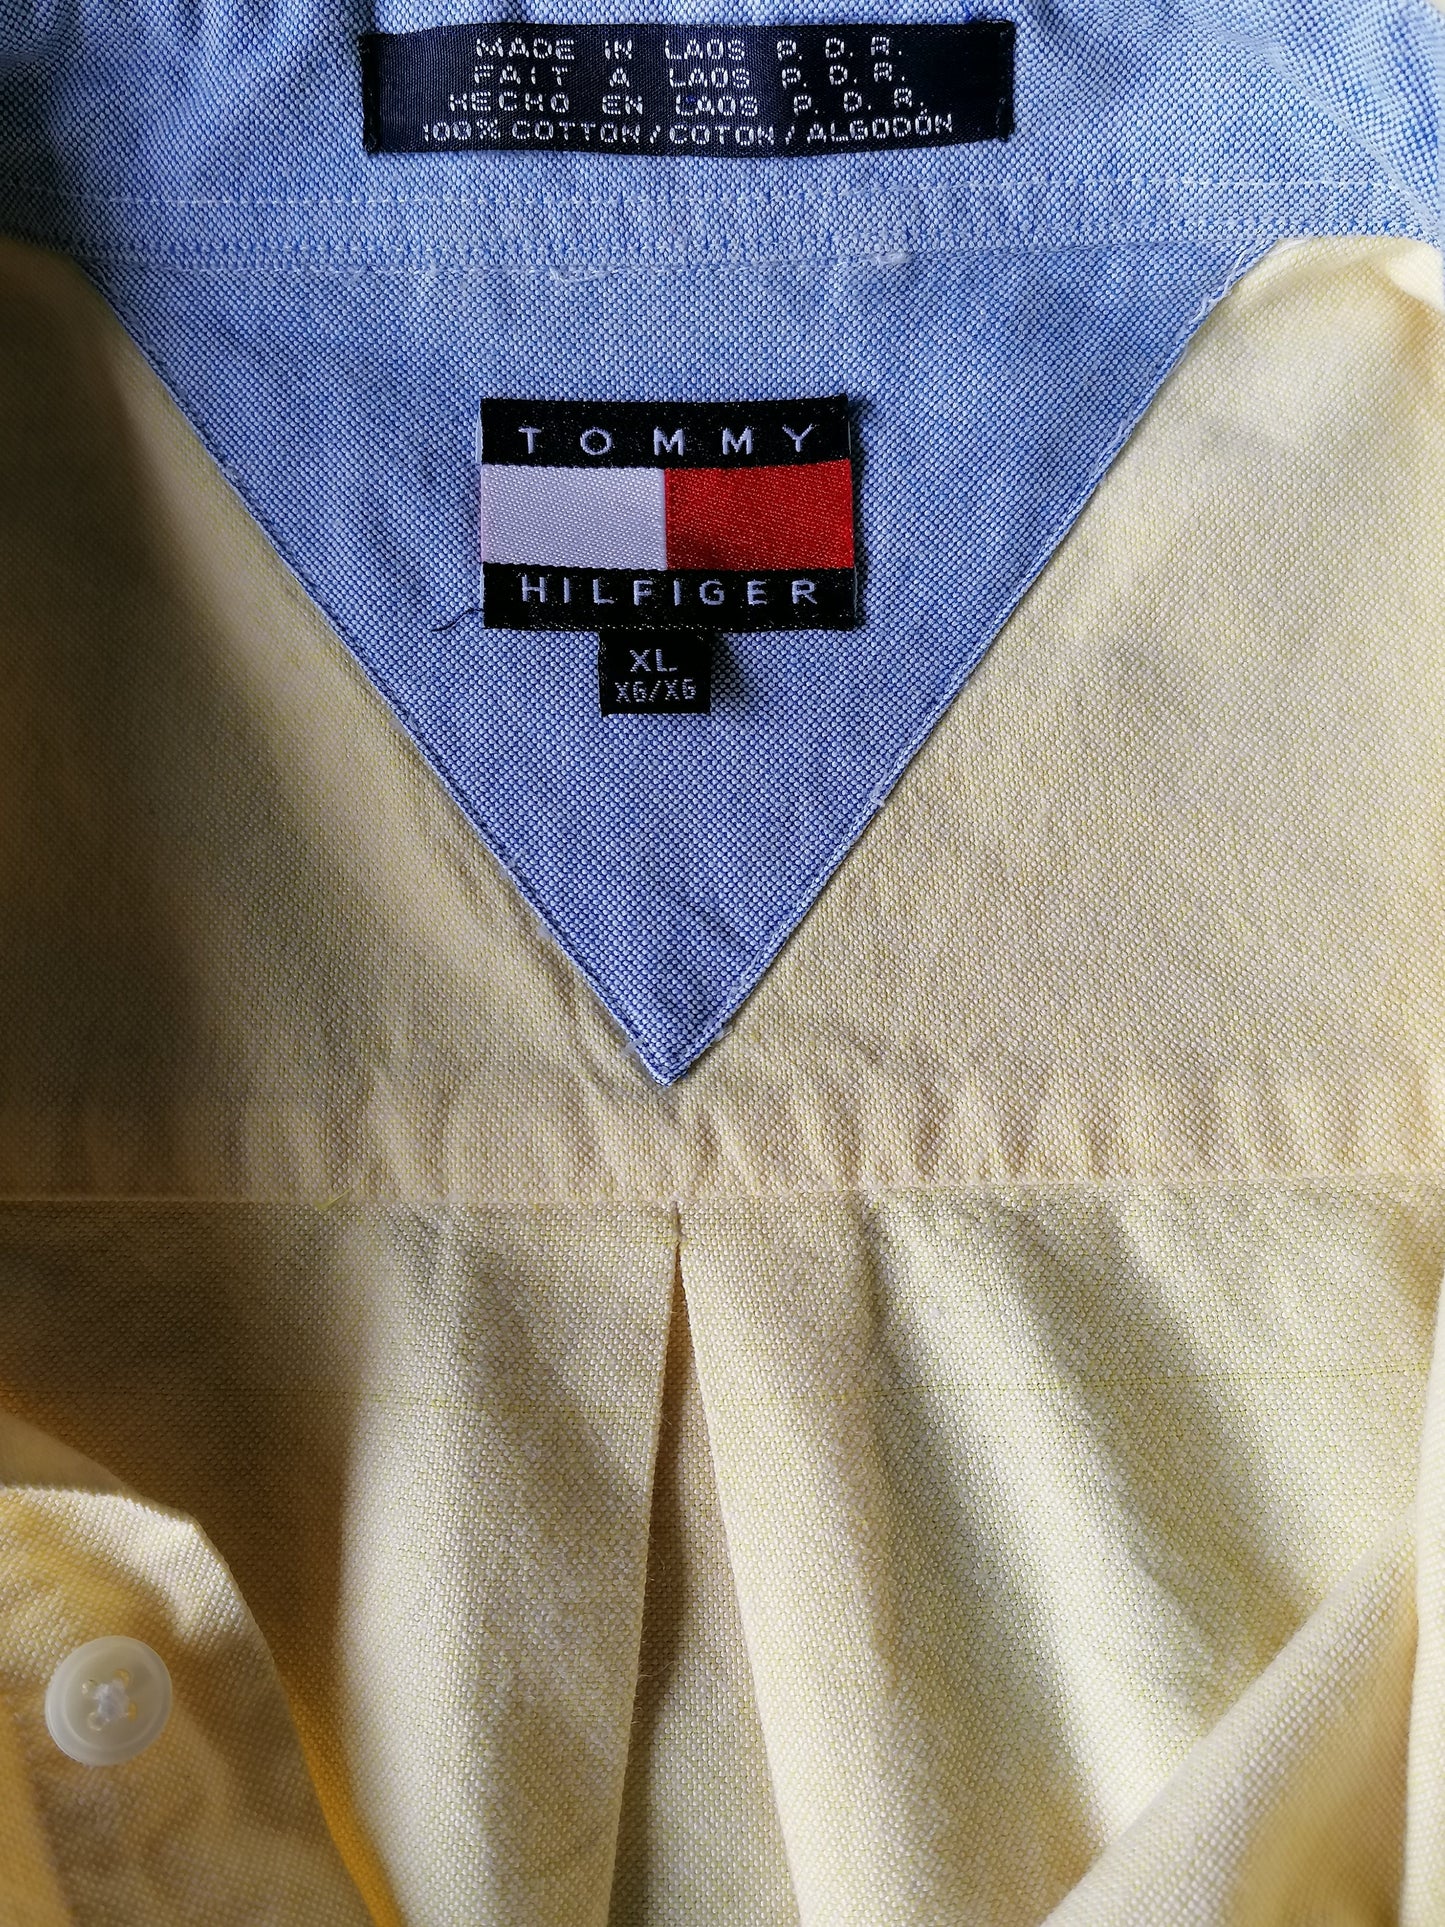 Vintage Tommy Hilfiger shirt. Yellow colored. Size XL / XXL